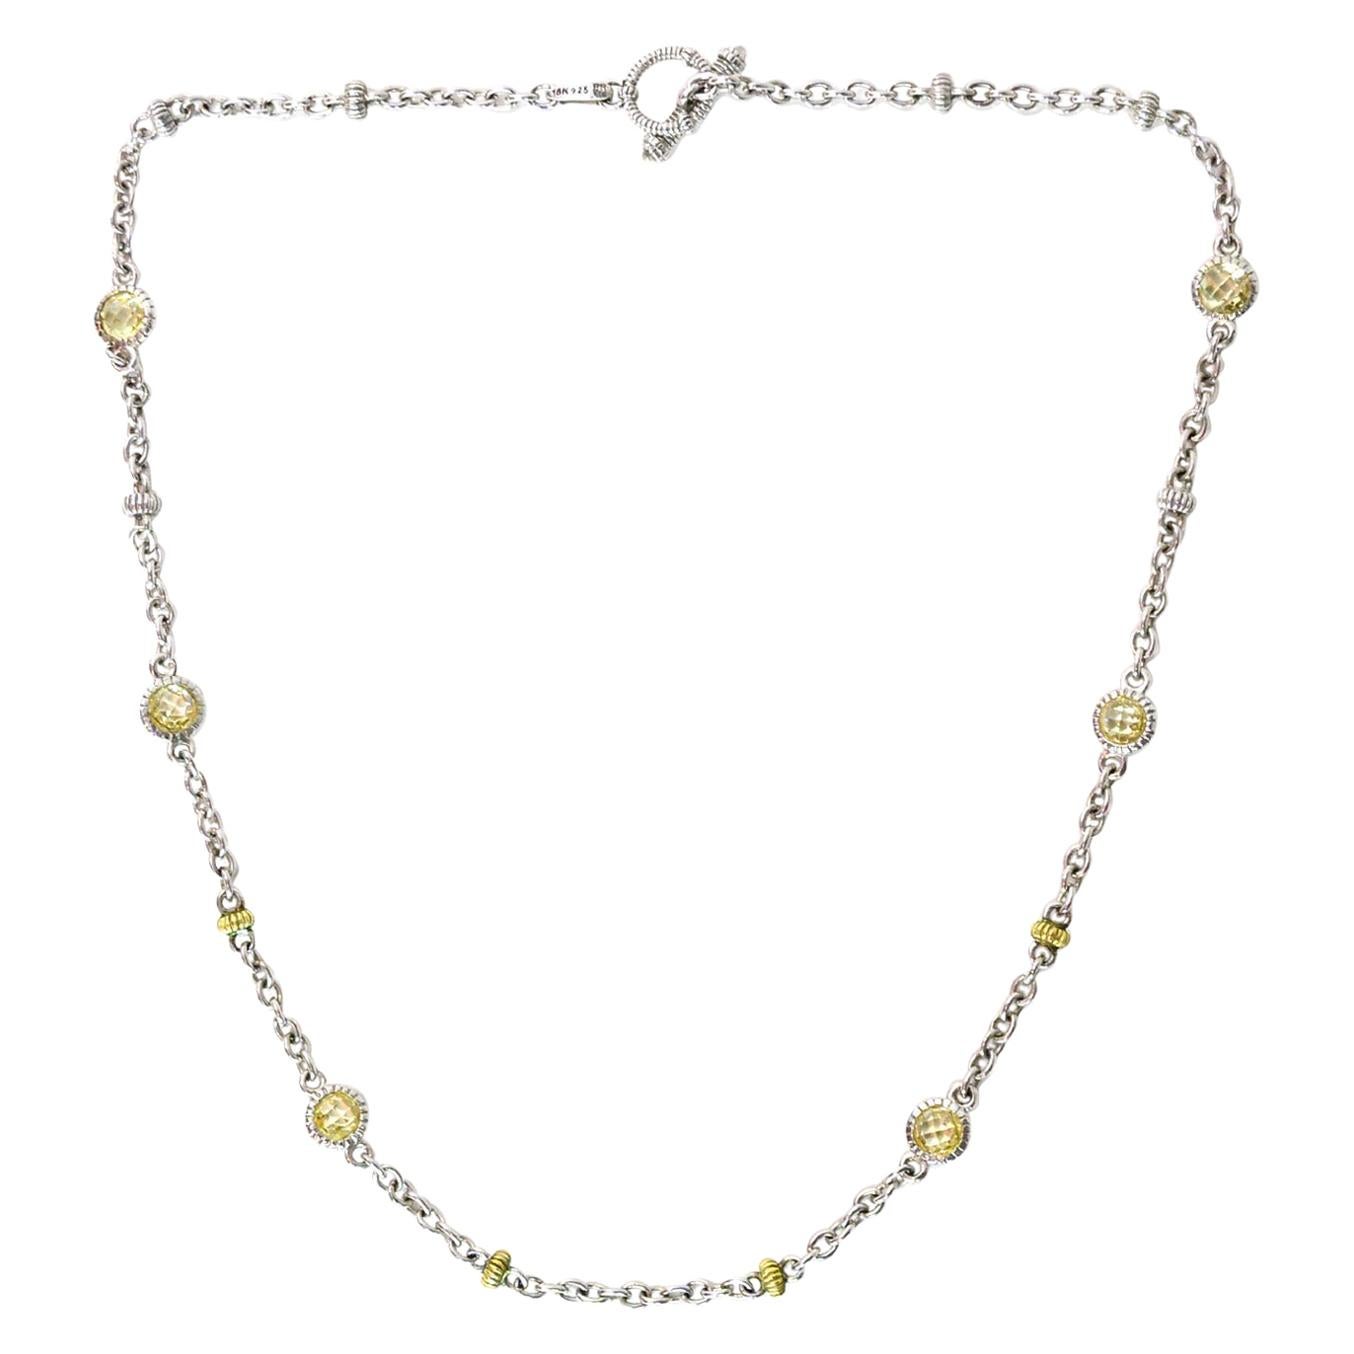 Judith Ripka Sterling Silver/18K Gold Chain Necklace W/ Faceted Canary  Crystals